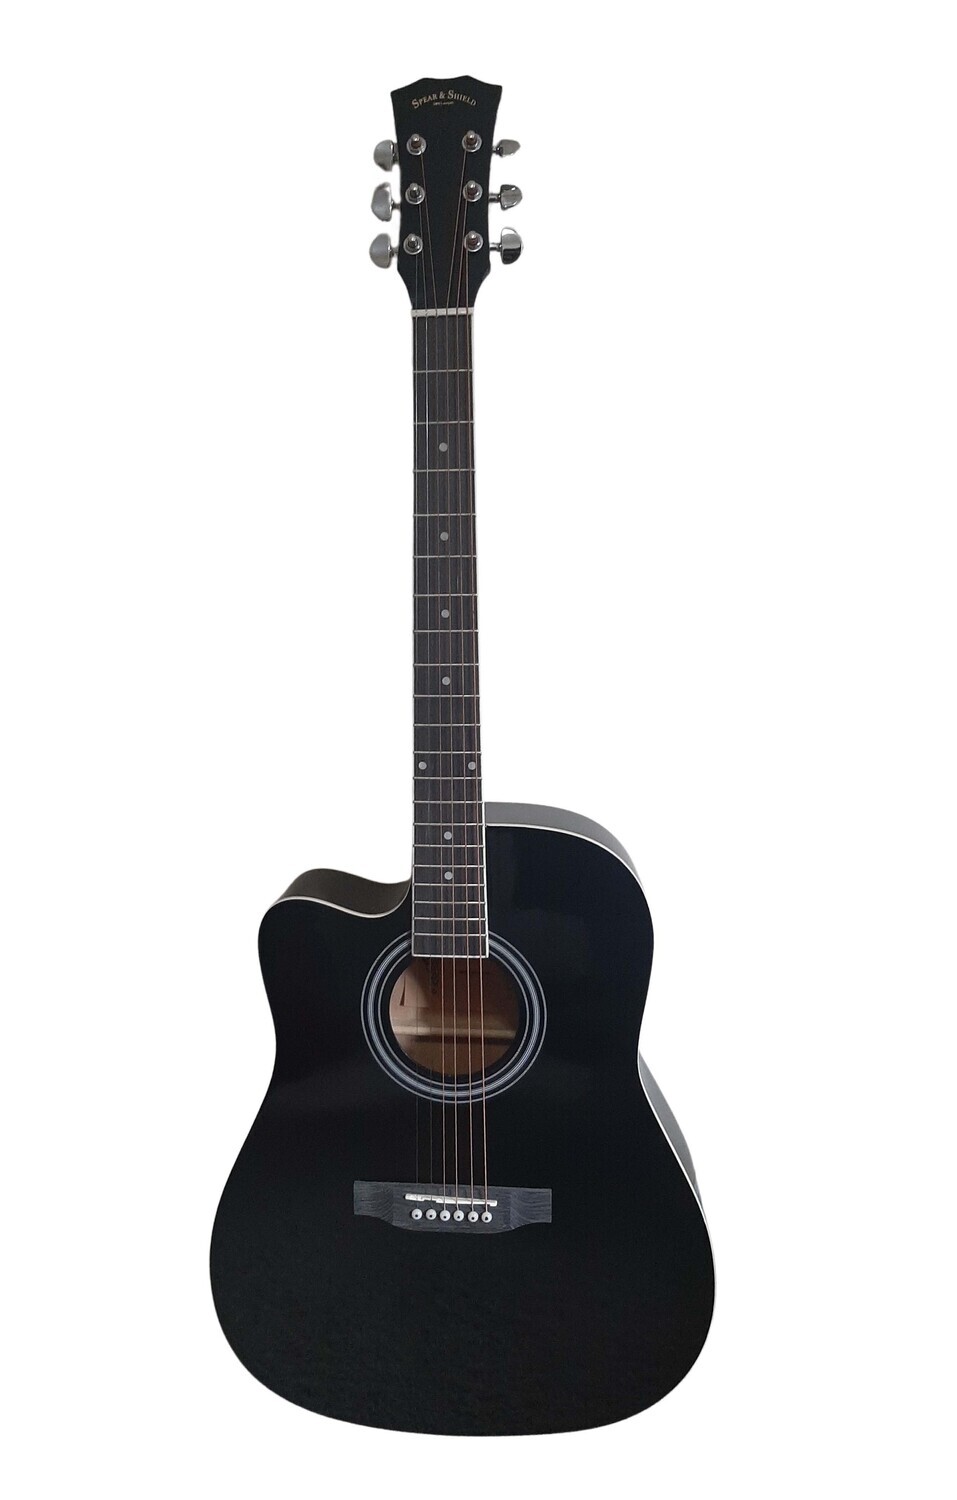 Spear & Shield Left handed Acoustic Guitar for Beginners Adults Students Intermediate players 41-inch full-size Dreadnought body cutaway Black SPS342LF Free Shipping